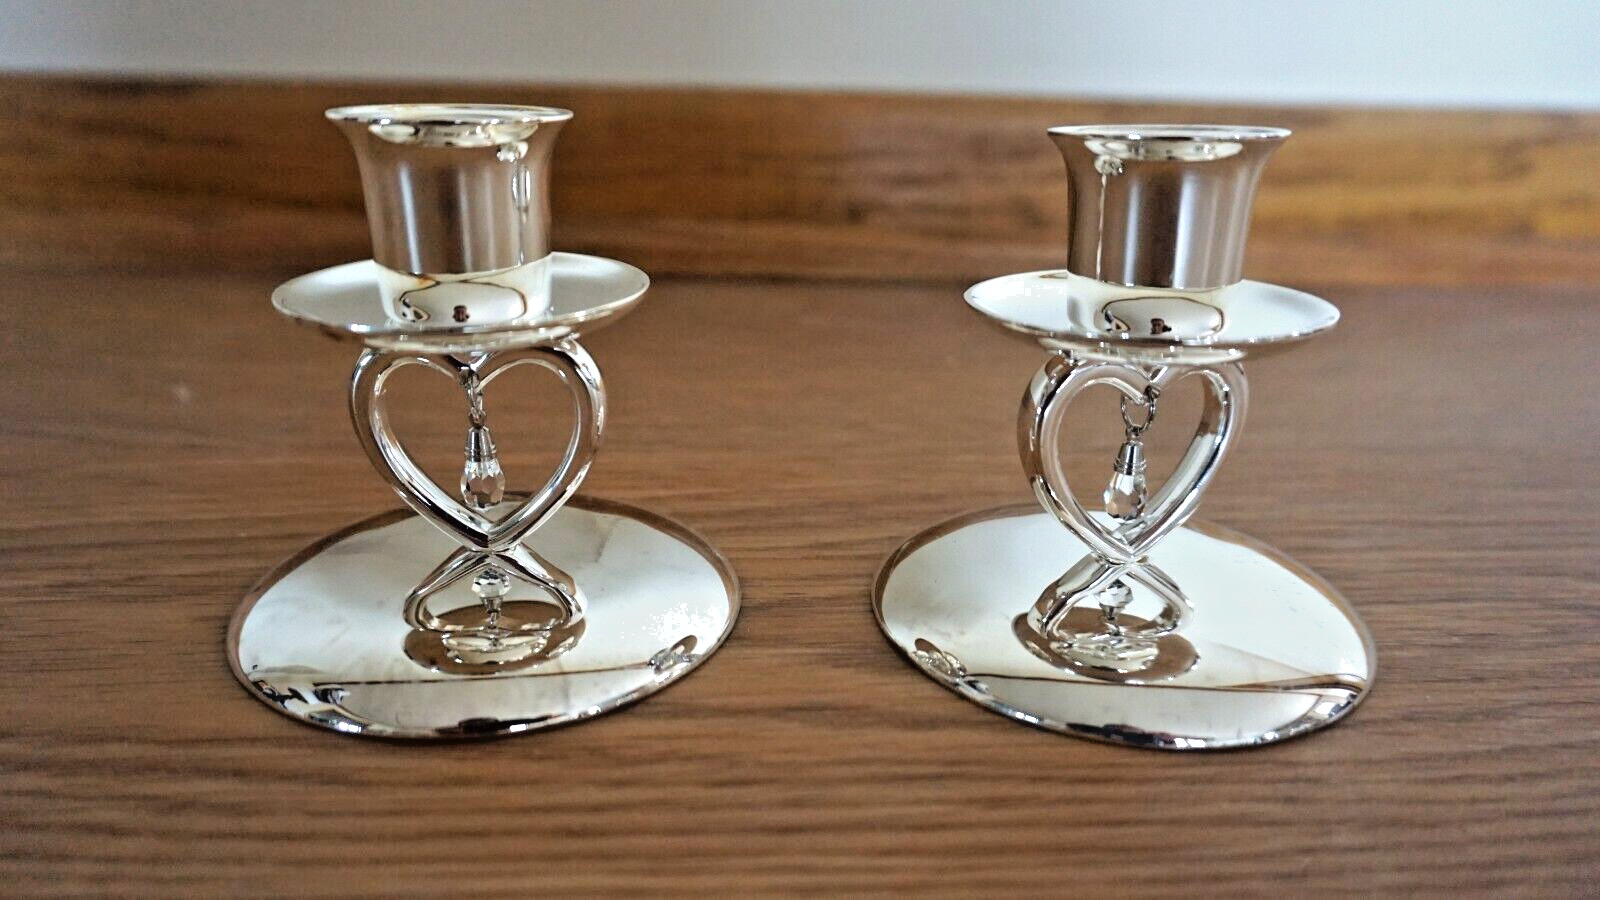 THINGS REMEMBERED SWAROVSKI CHRYSTAL CANDLE HOLDERS SILVER PLATED NEW